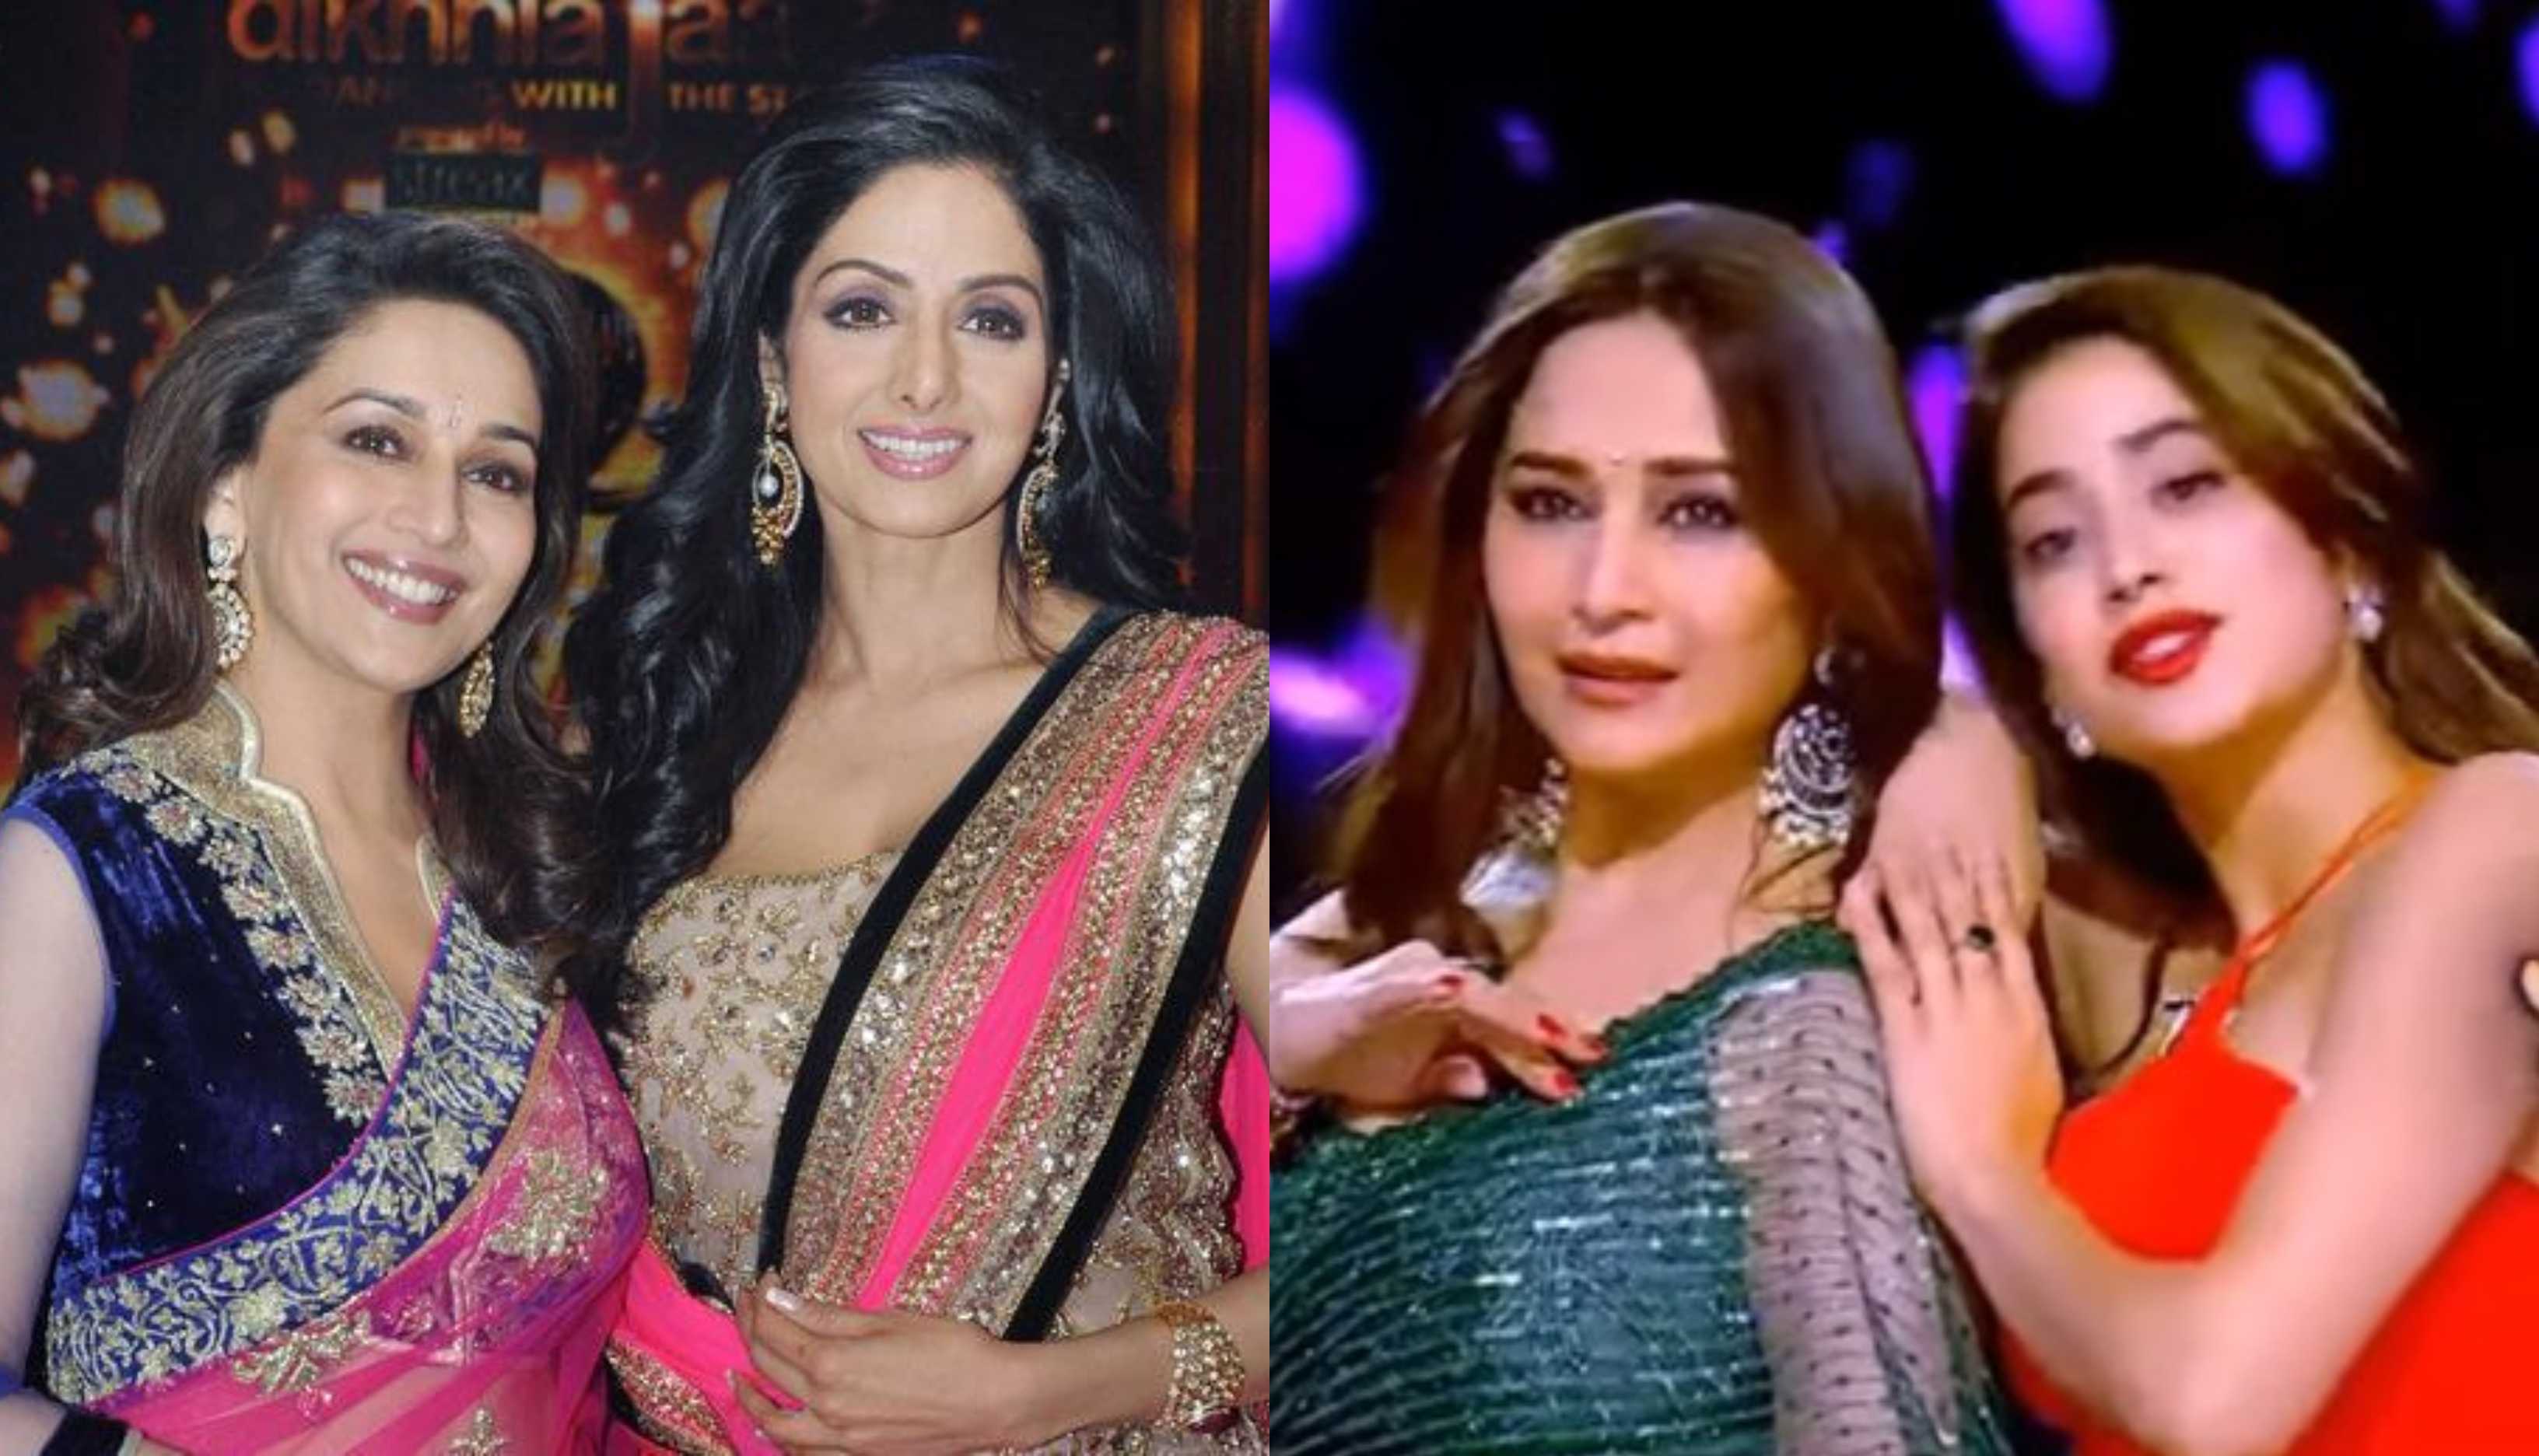 After Sridevi, daughter Janhvi Kapoor dances with Madhuri Dixit on Jhalak Dikhhla Jaa stage; fans remember the late legend